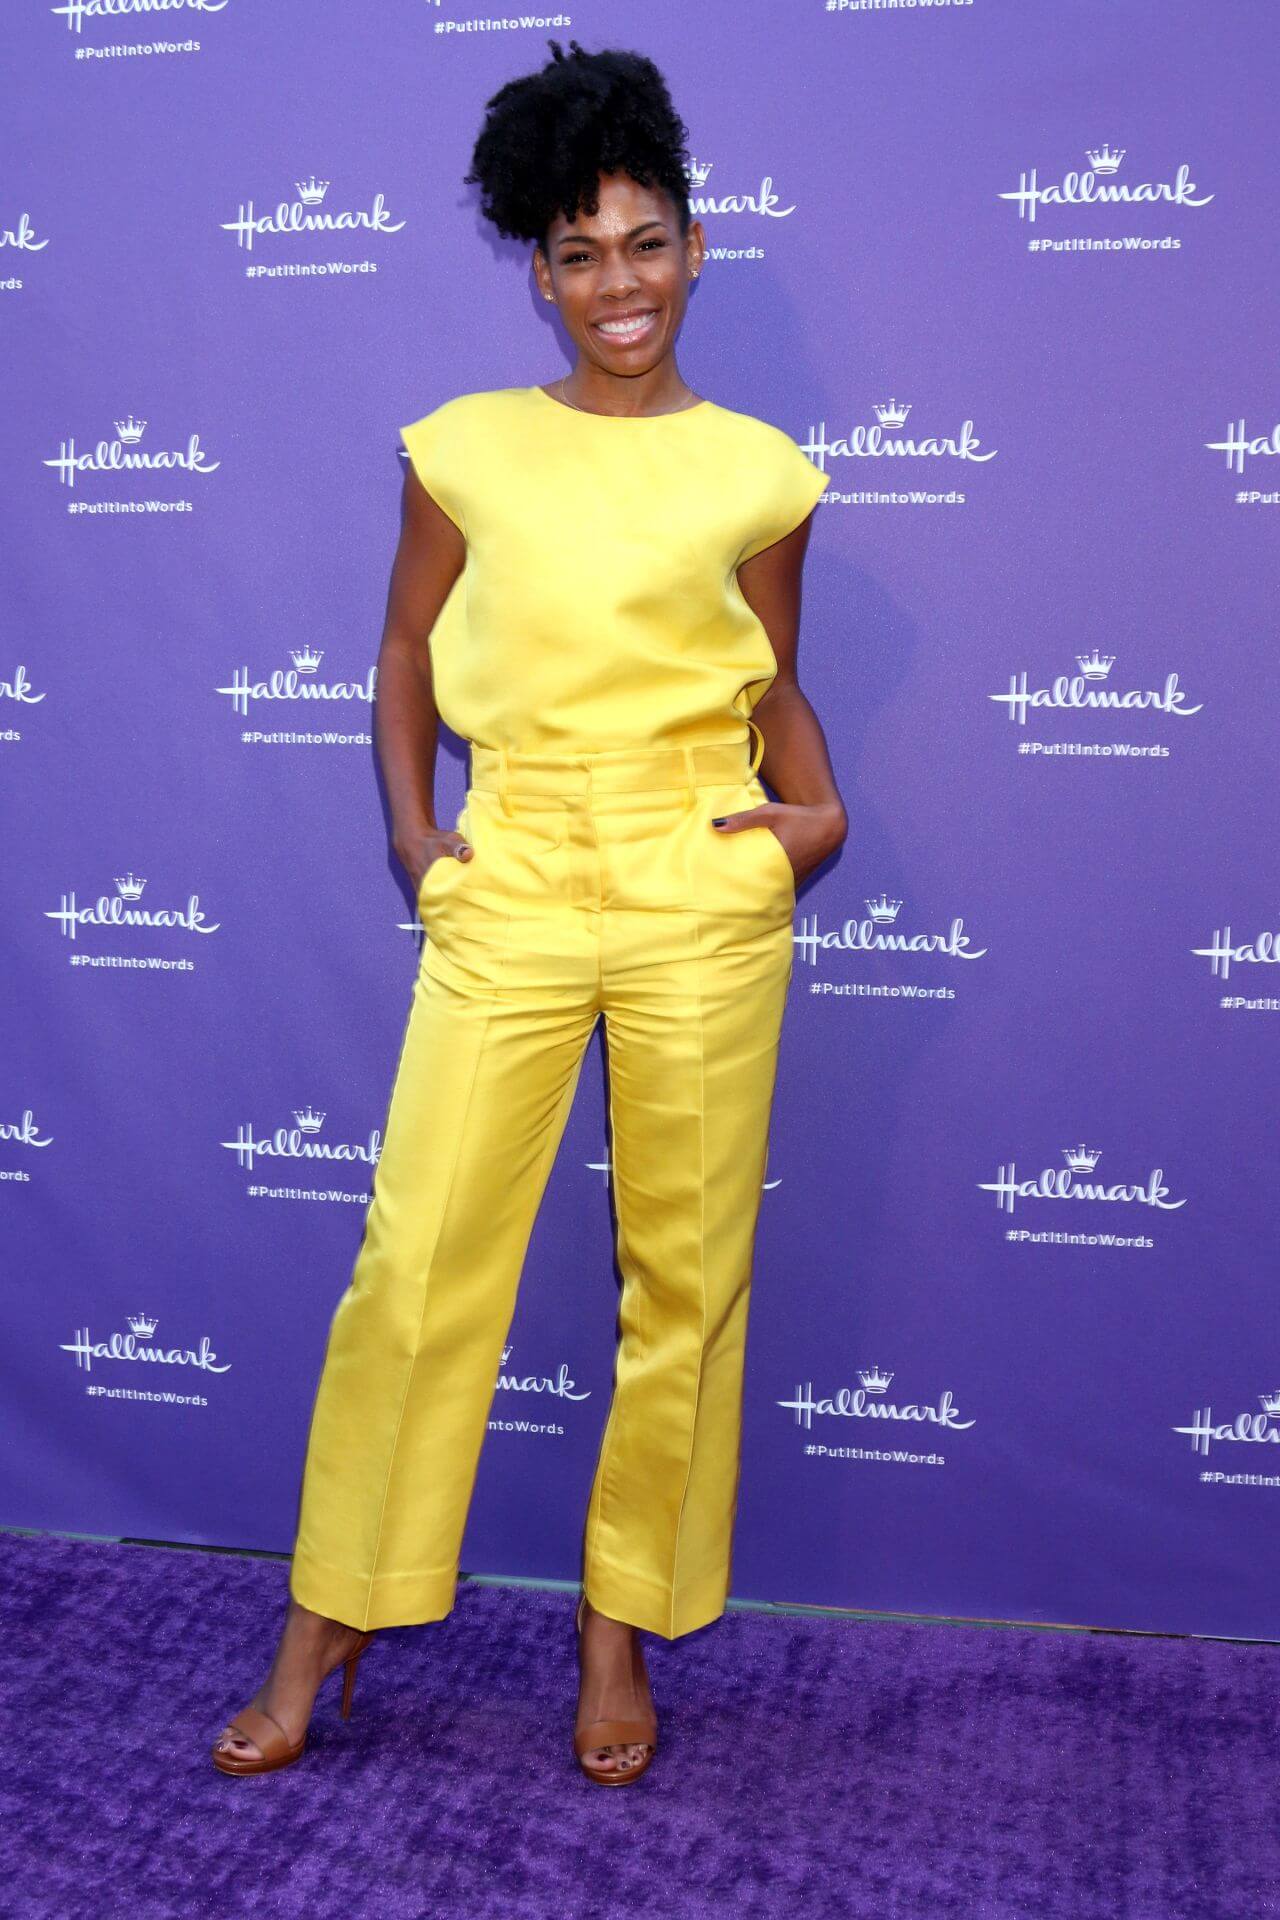 Angela Lewis In Yellow Jumpsuit Outfits At Hallmark’s Put It Into Words Campaign Launch Party in LA